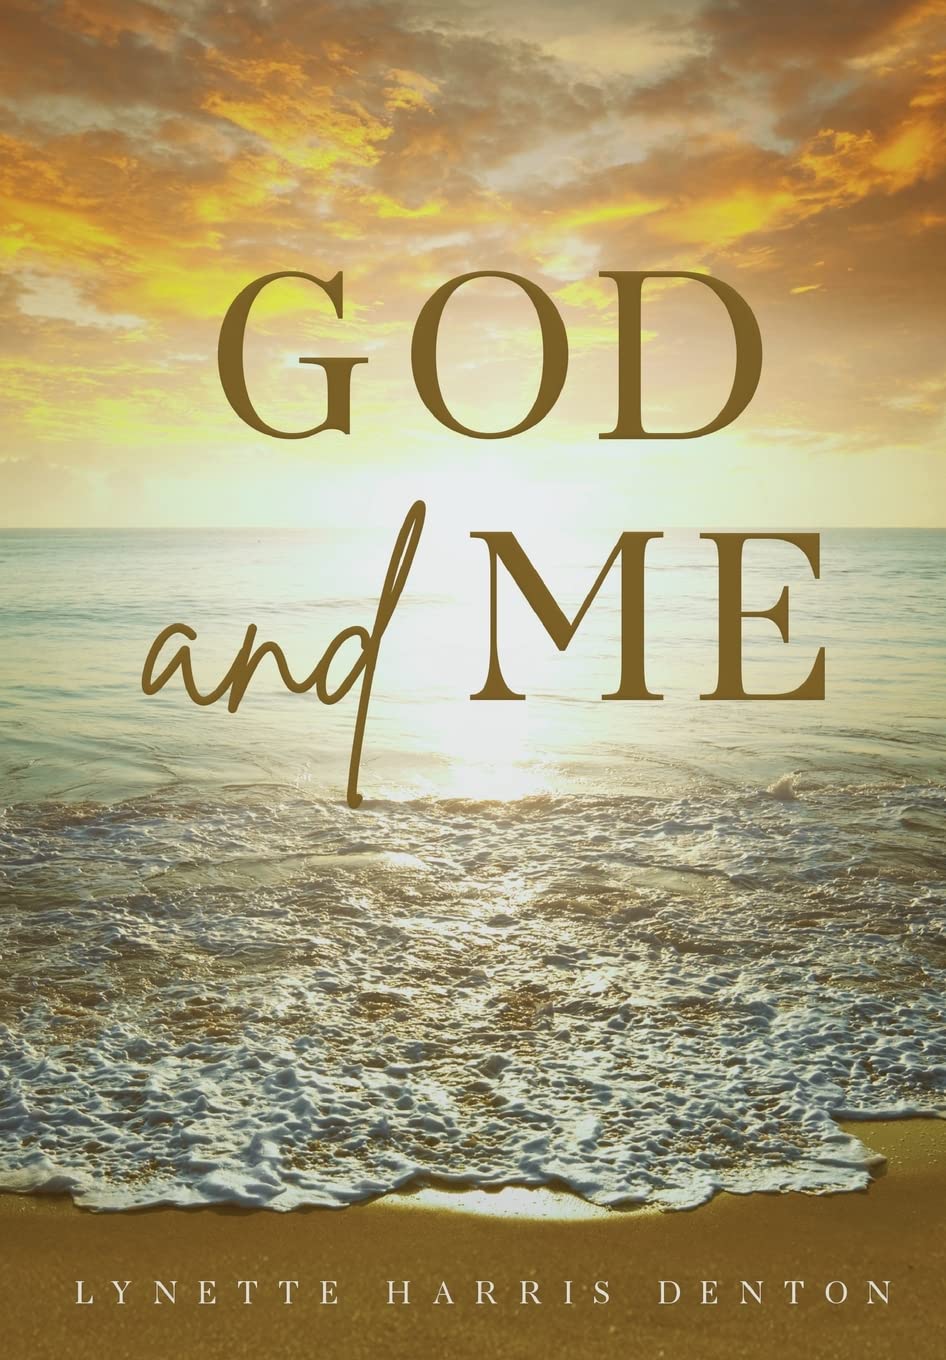 Book cover for "God and Me" featuring the ocean, sand, and sky